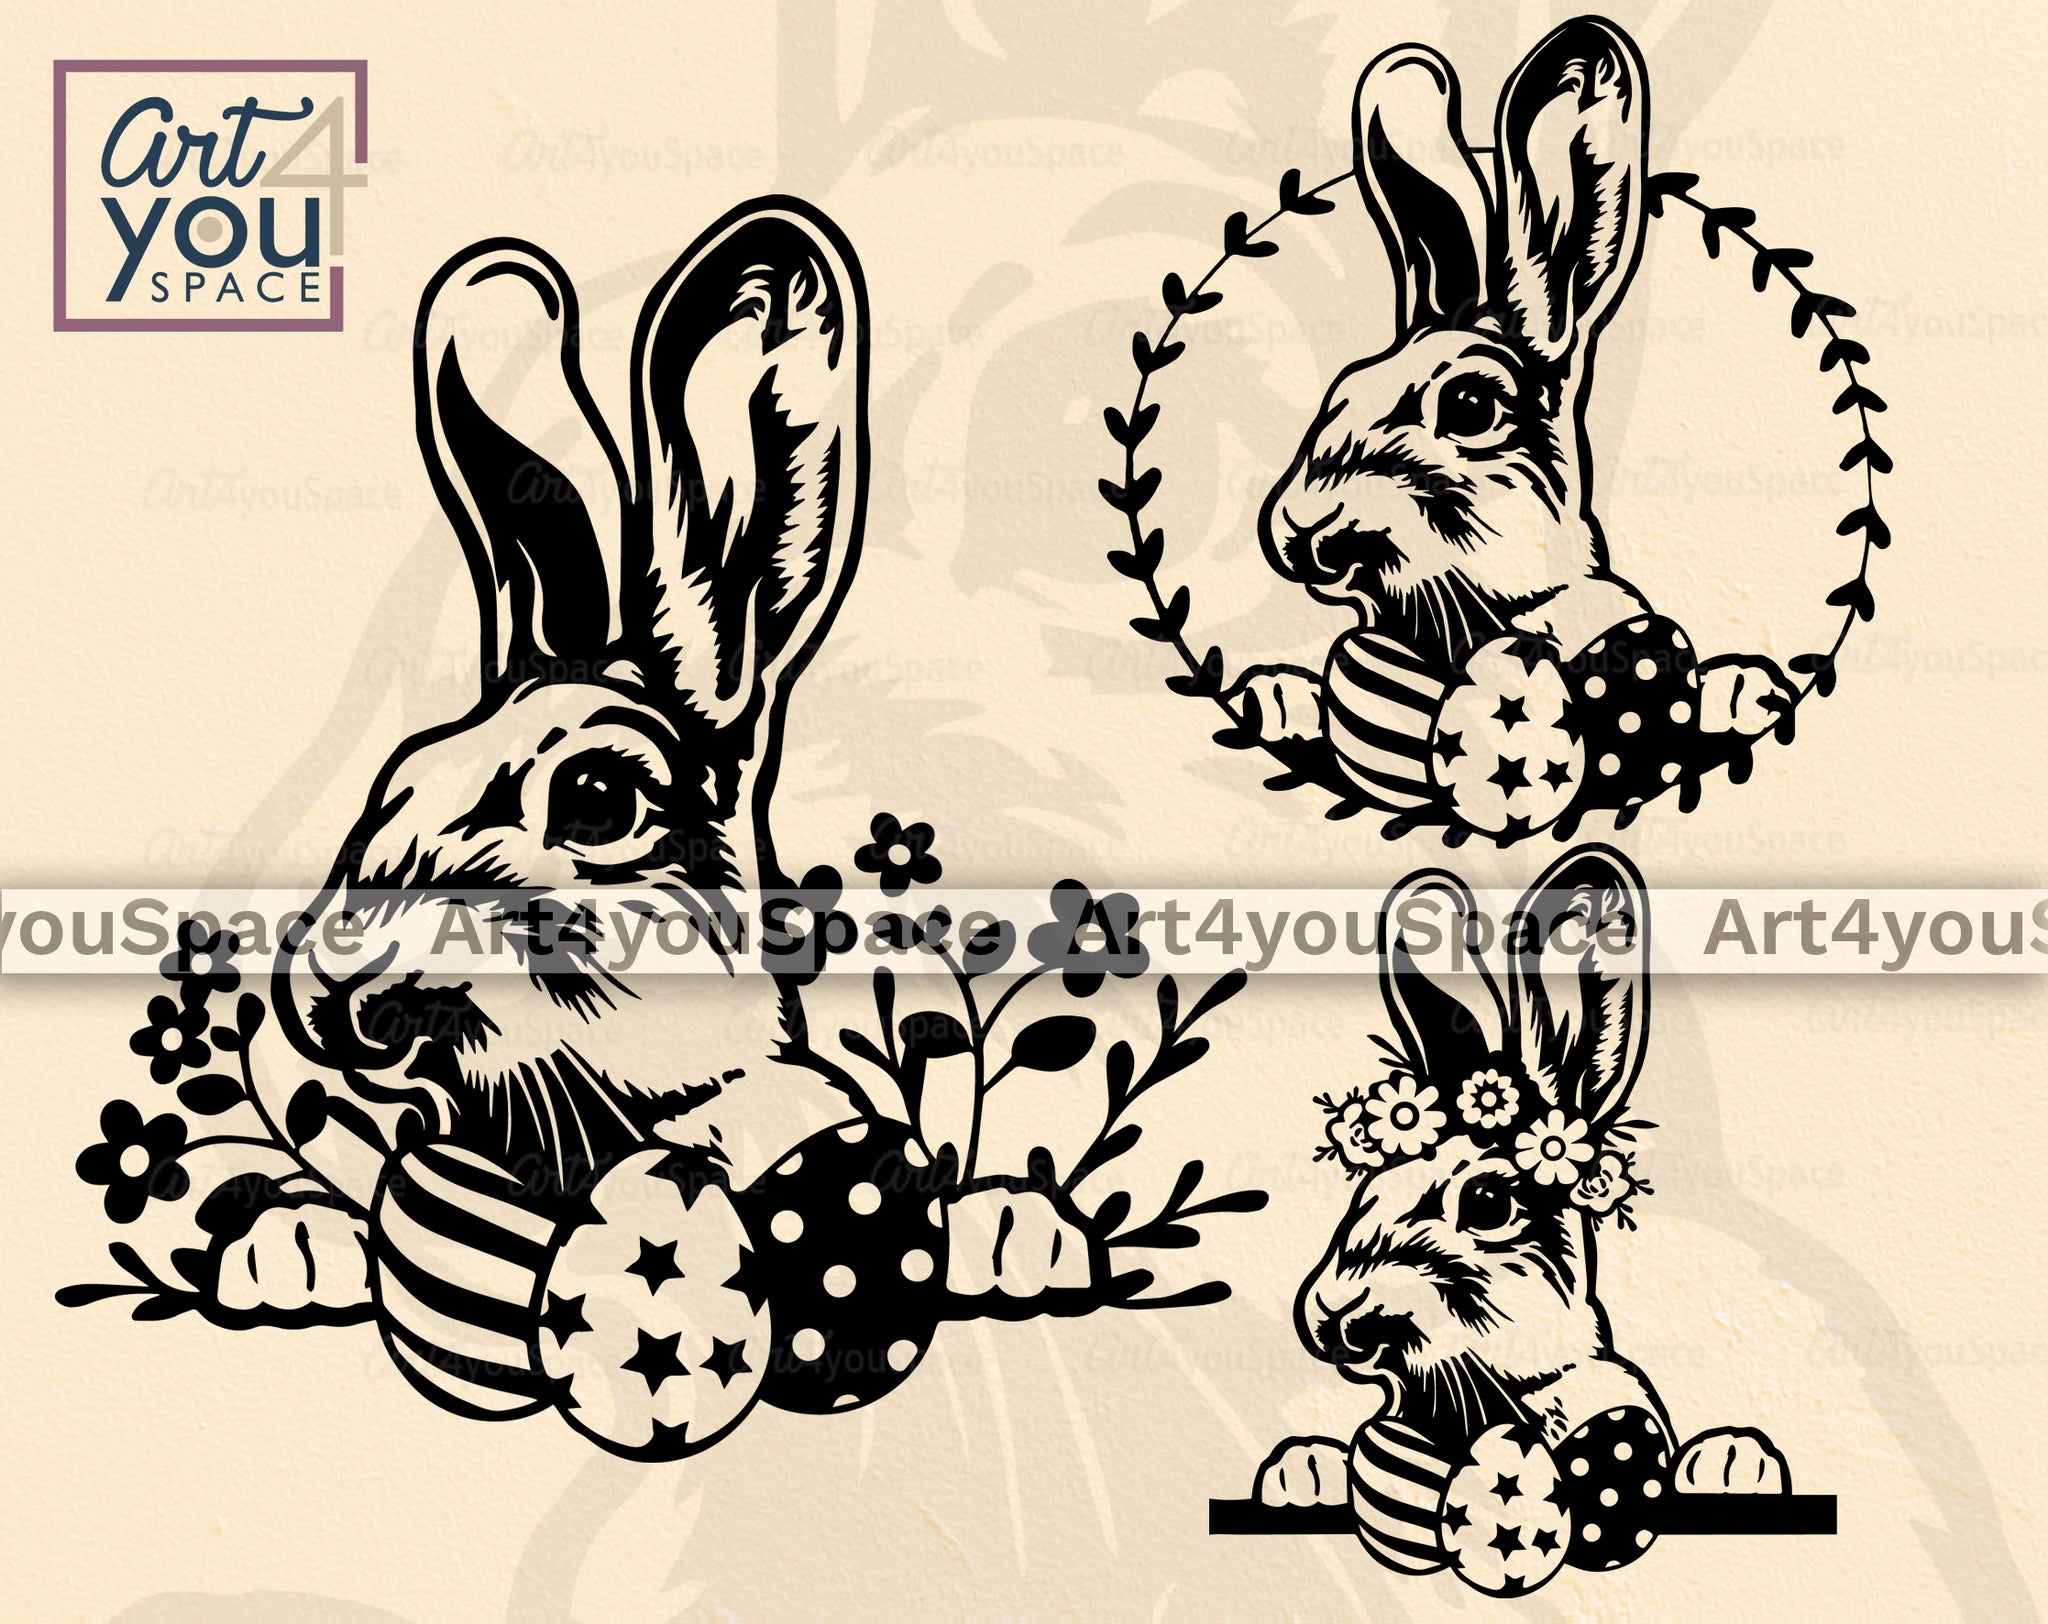 huge easter bunny clipart